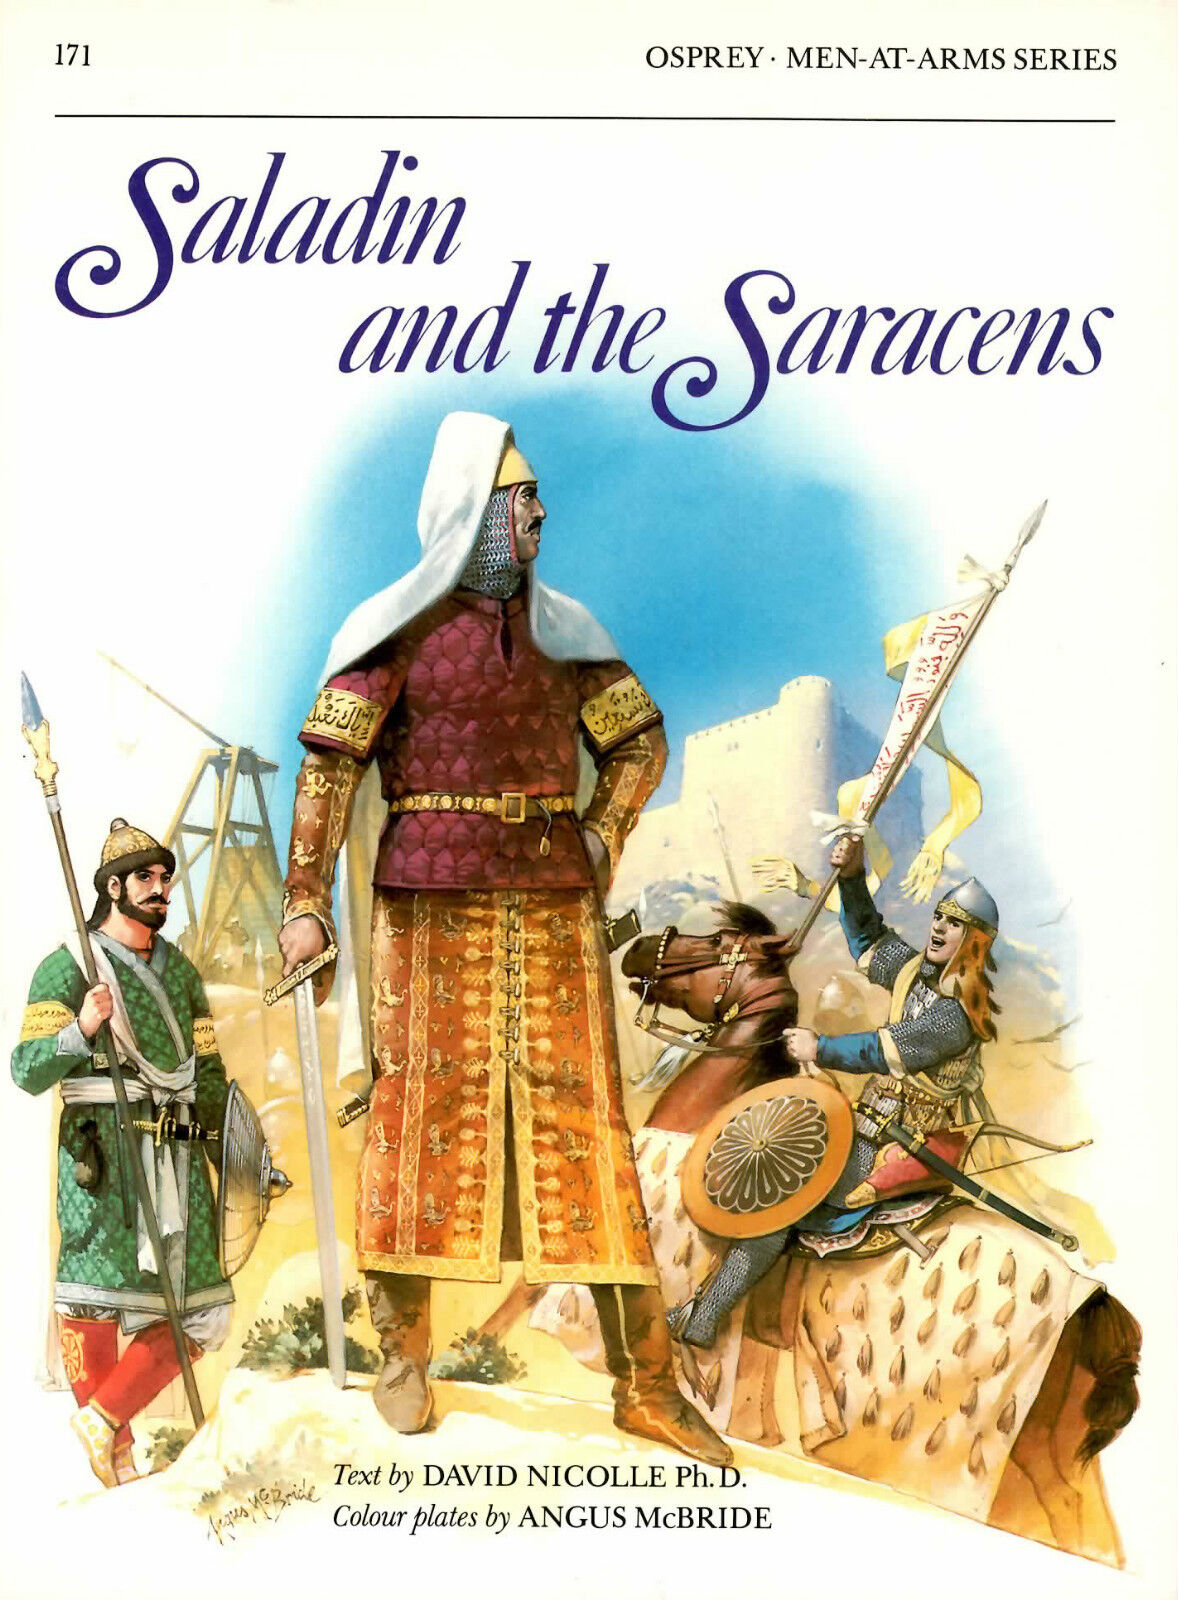 Osprey Men-at-Arms: Saladin and the Saracens 171 by David Nicolle (1986, PB)